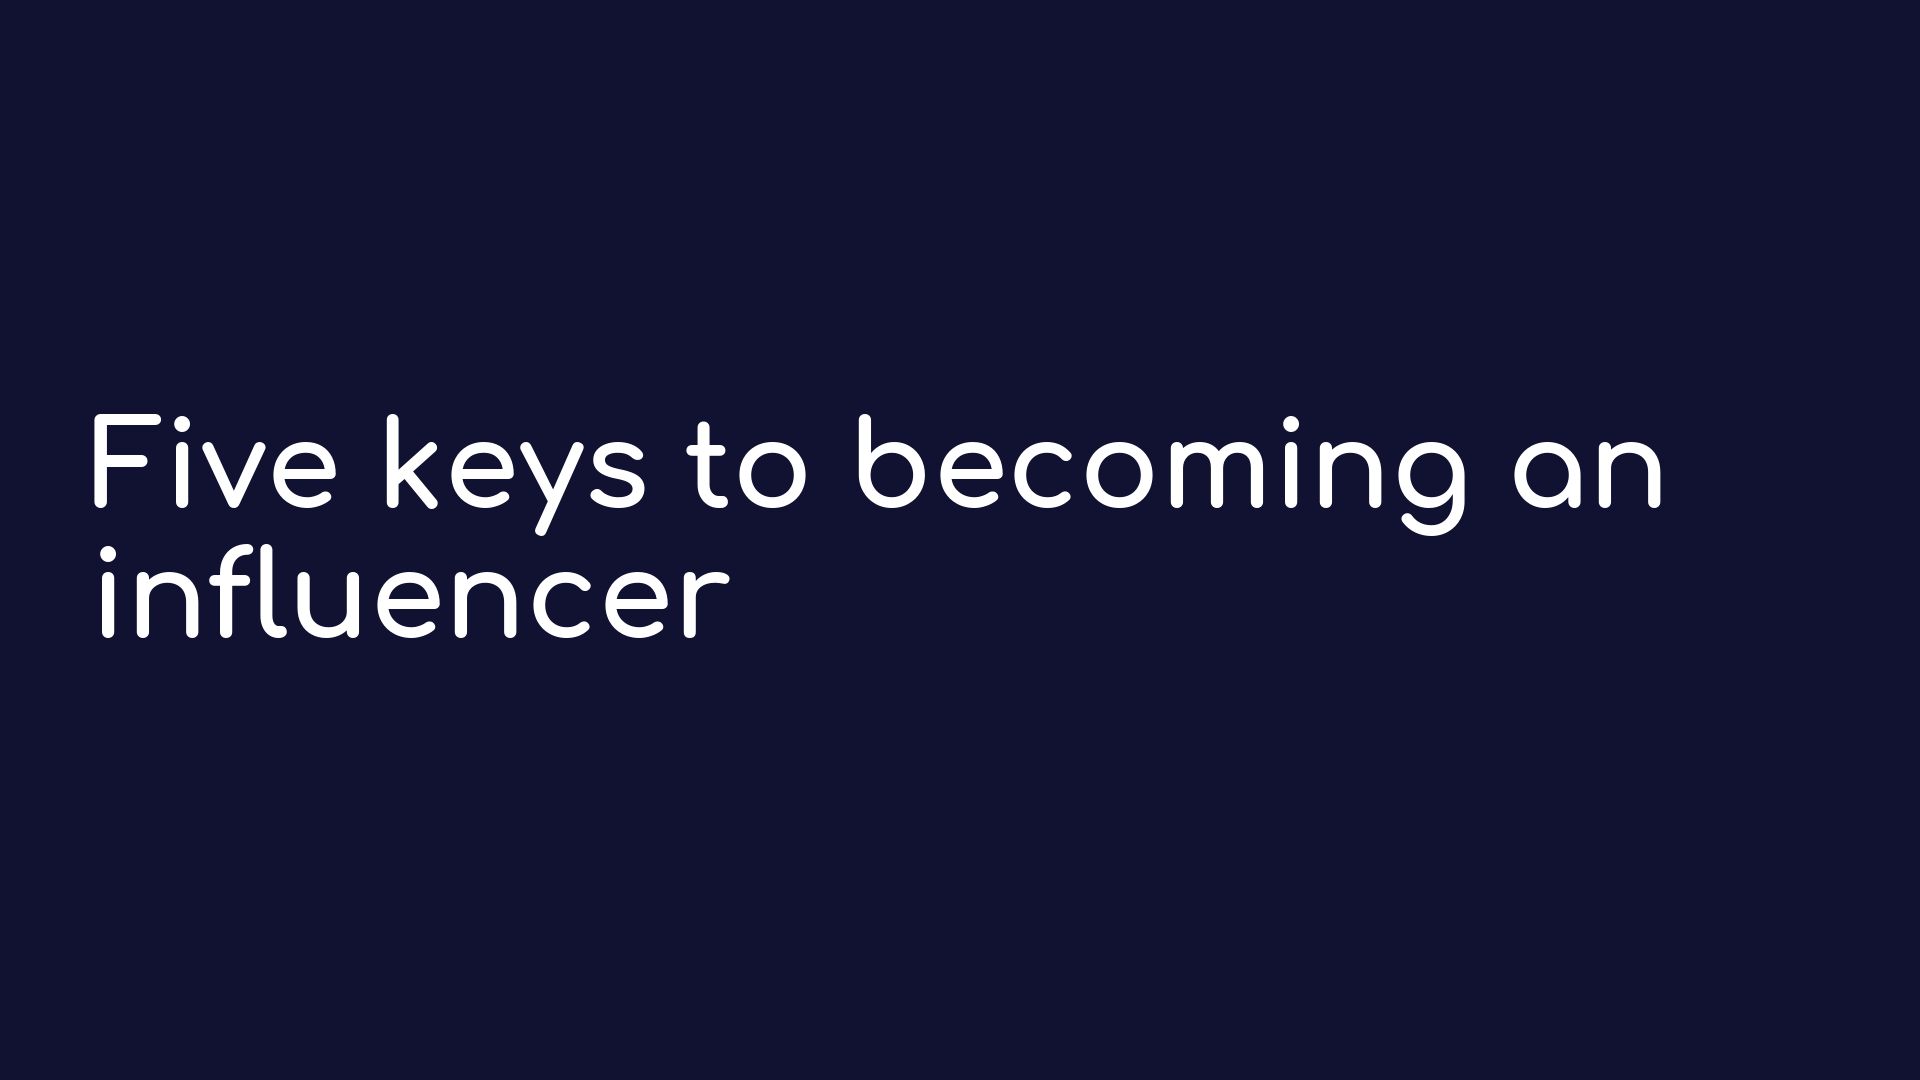 Five keys to becoming an influencer